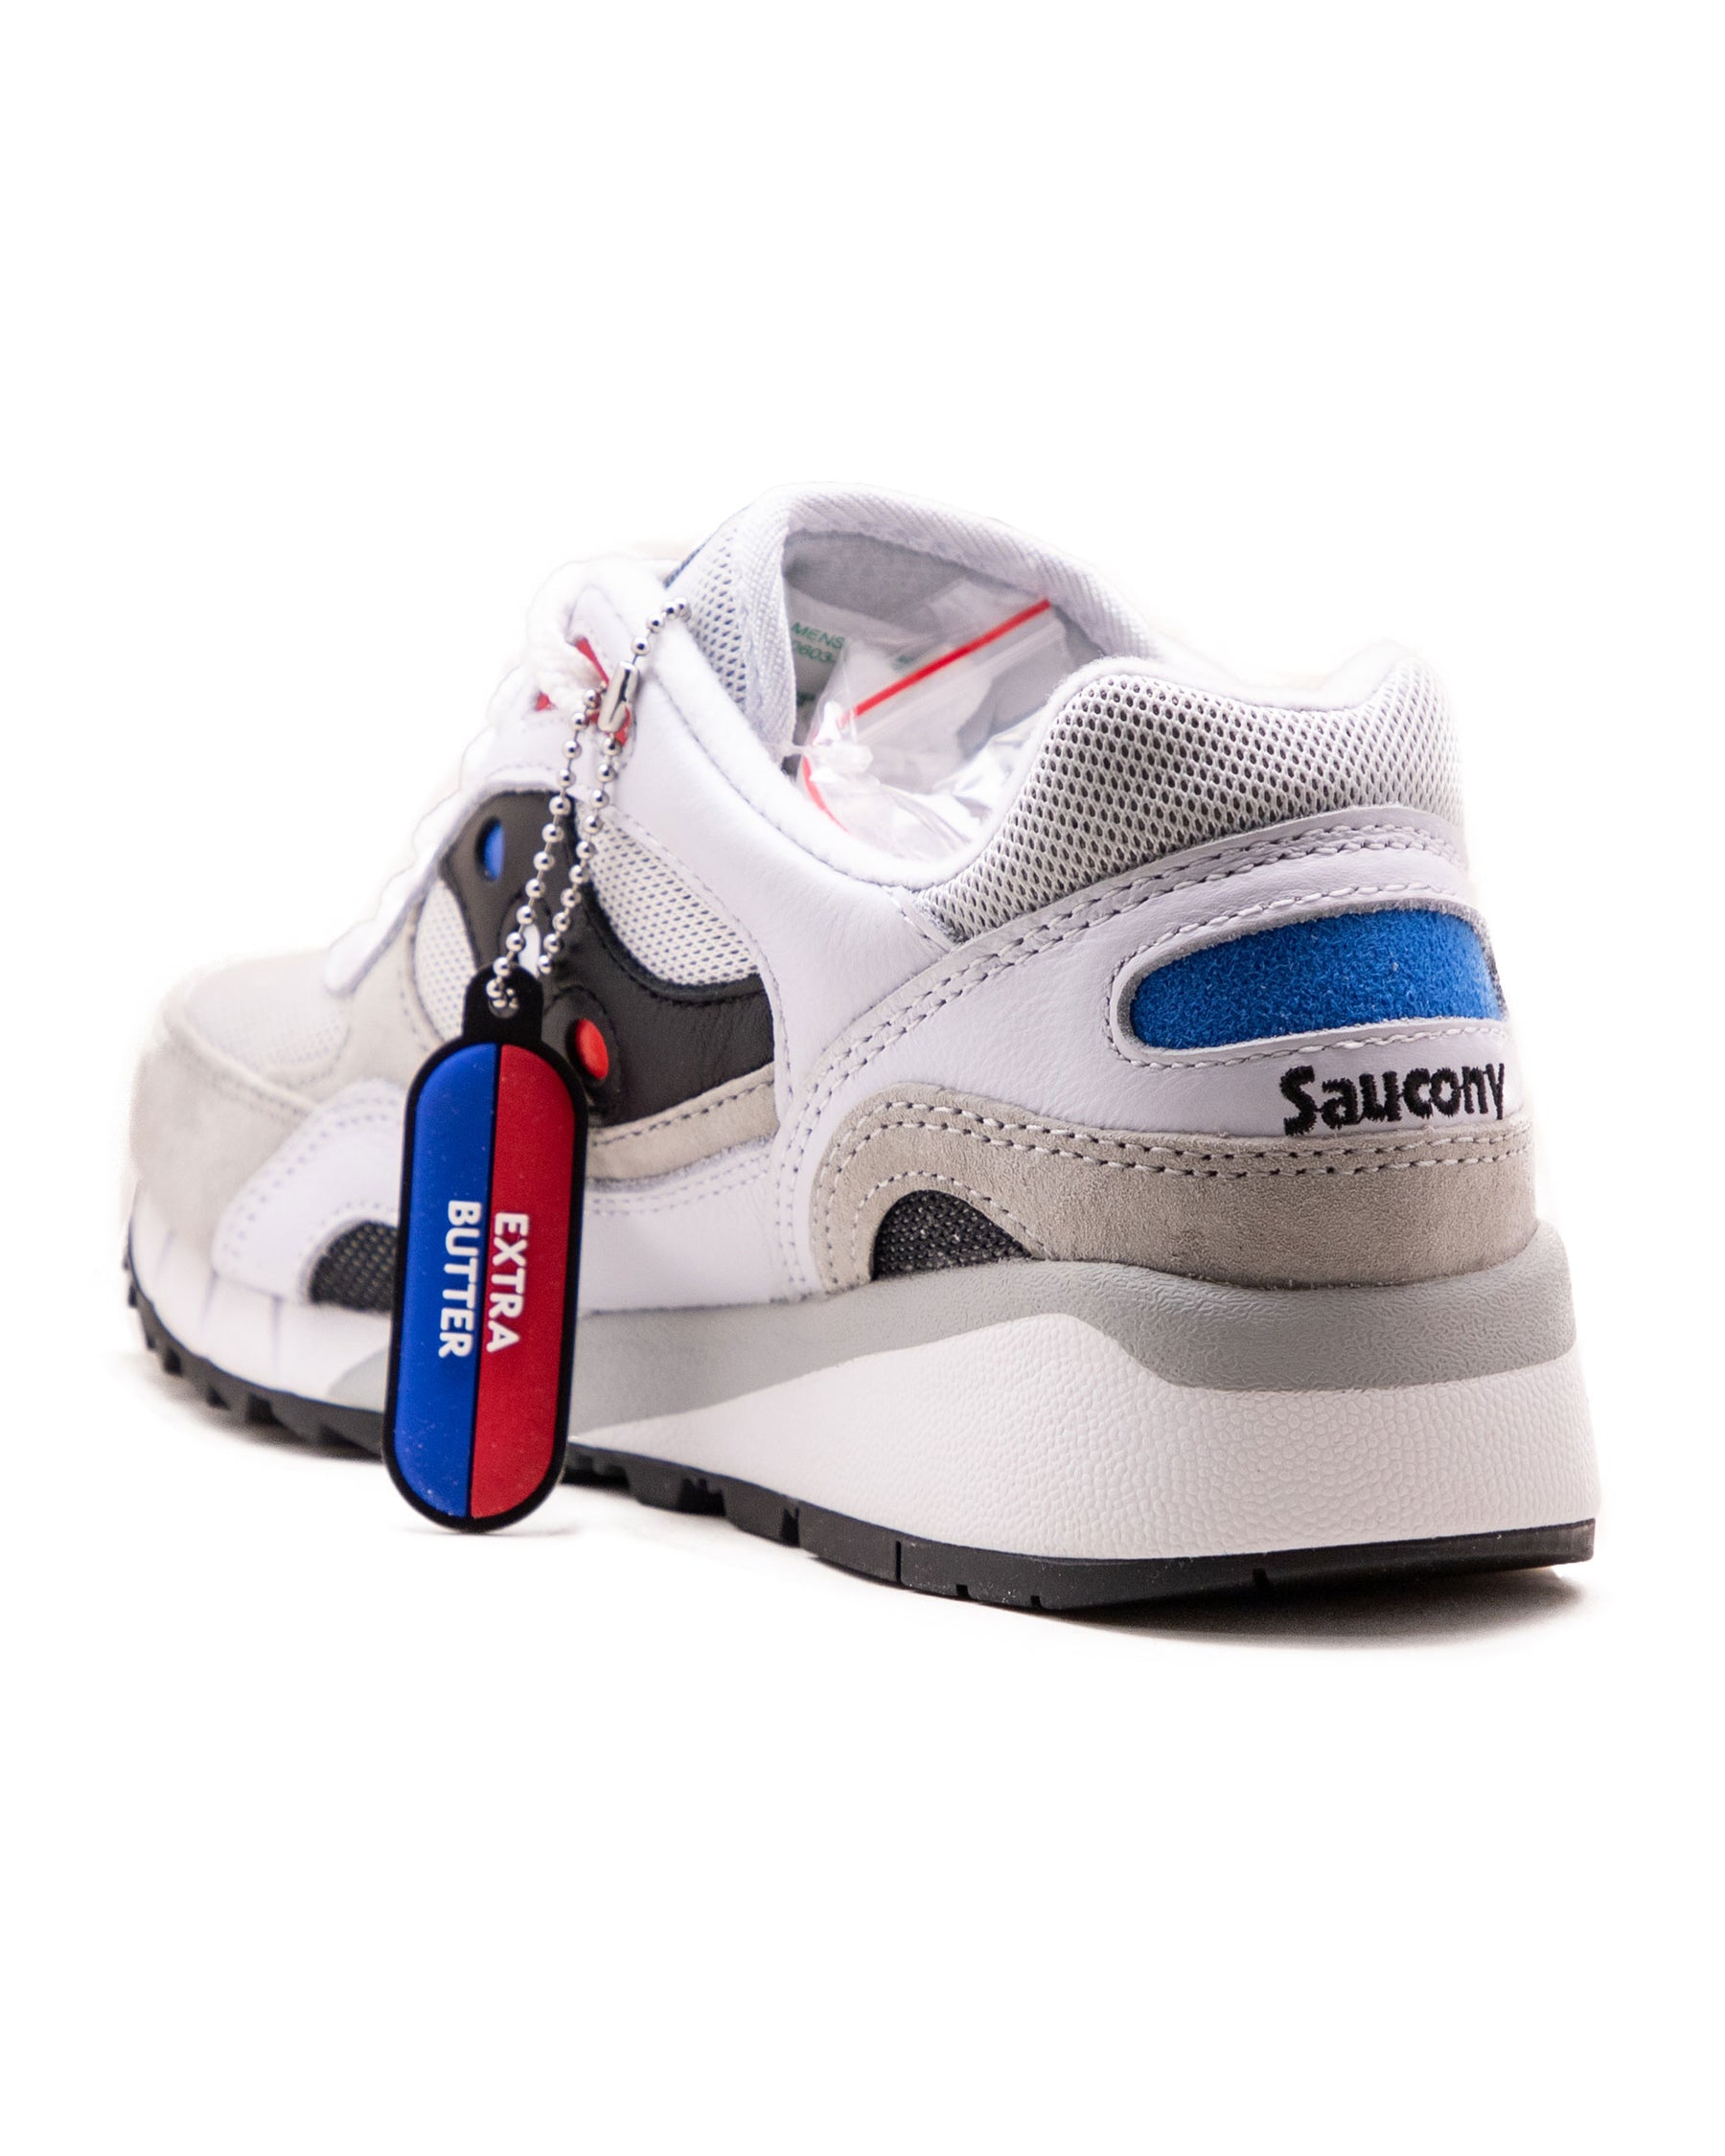 Extra Butter x Saucony Shadow 6000 S70603-1